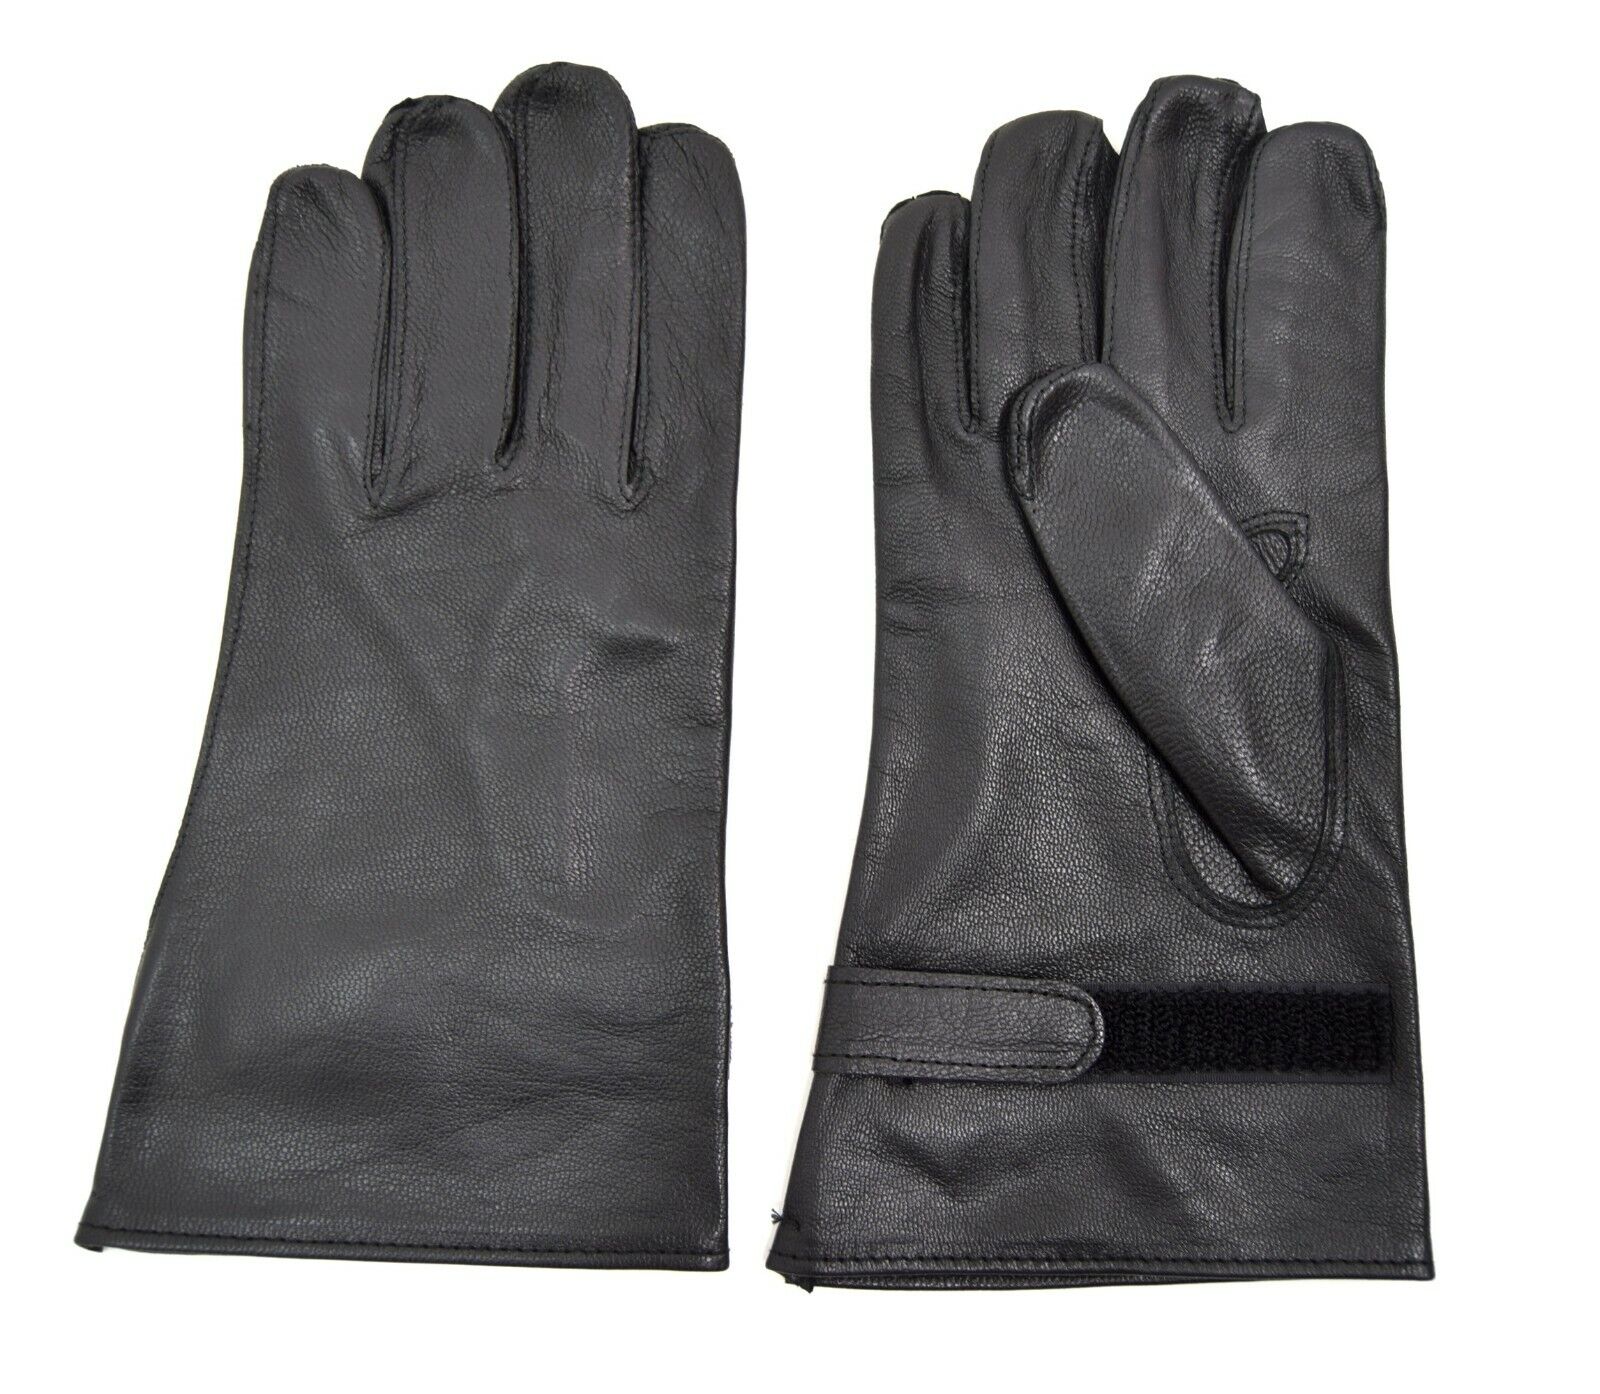 French Army Black Leather Gloves New Original NATO Military Surplus Thin Glove 